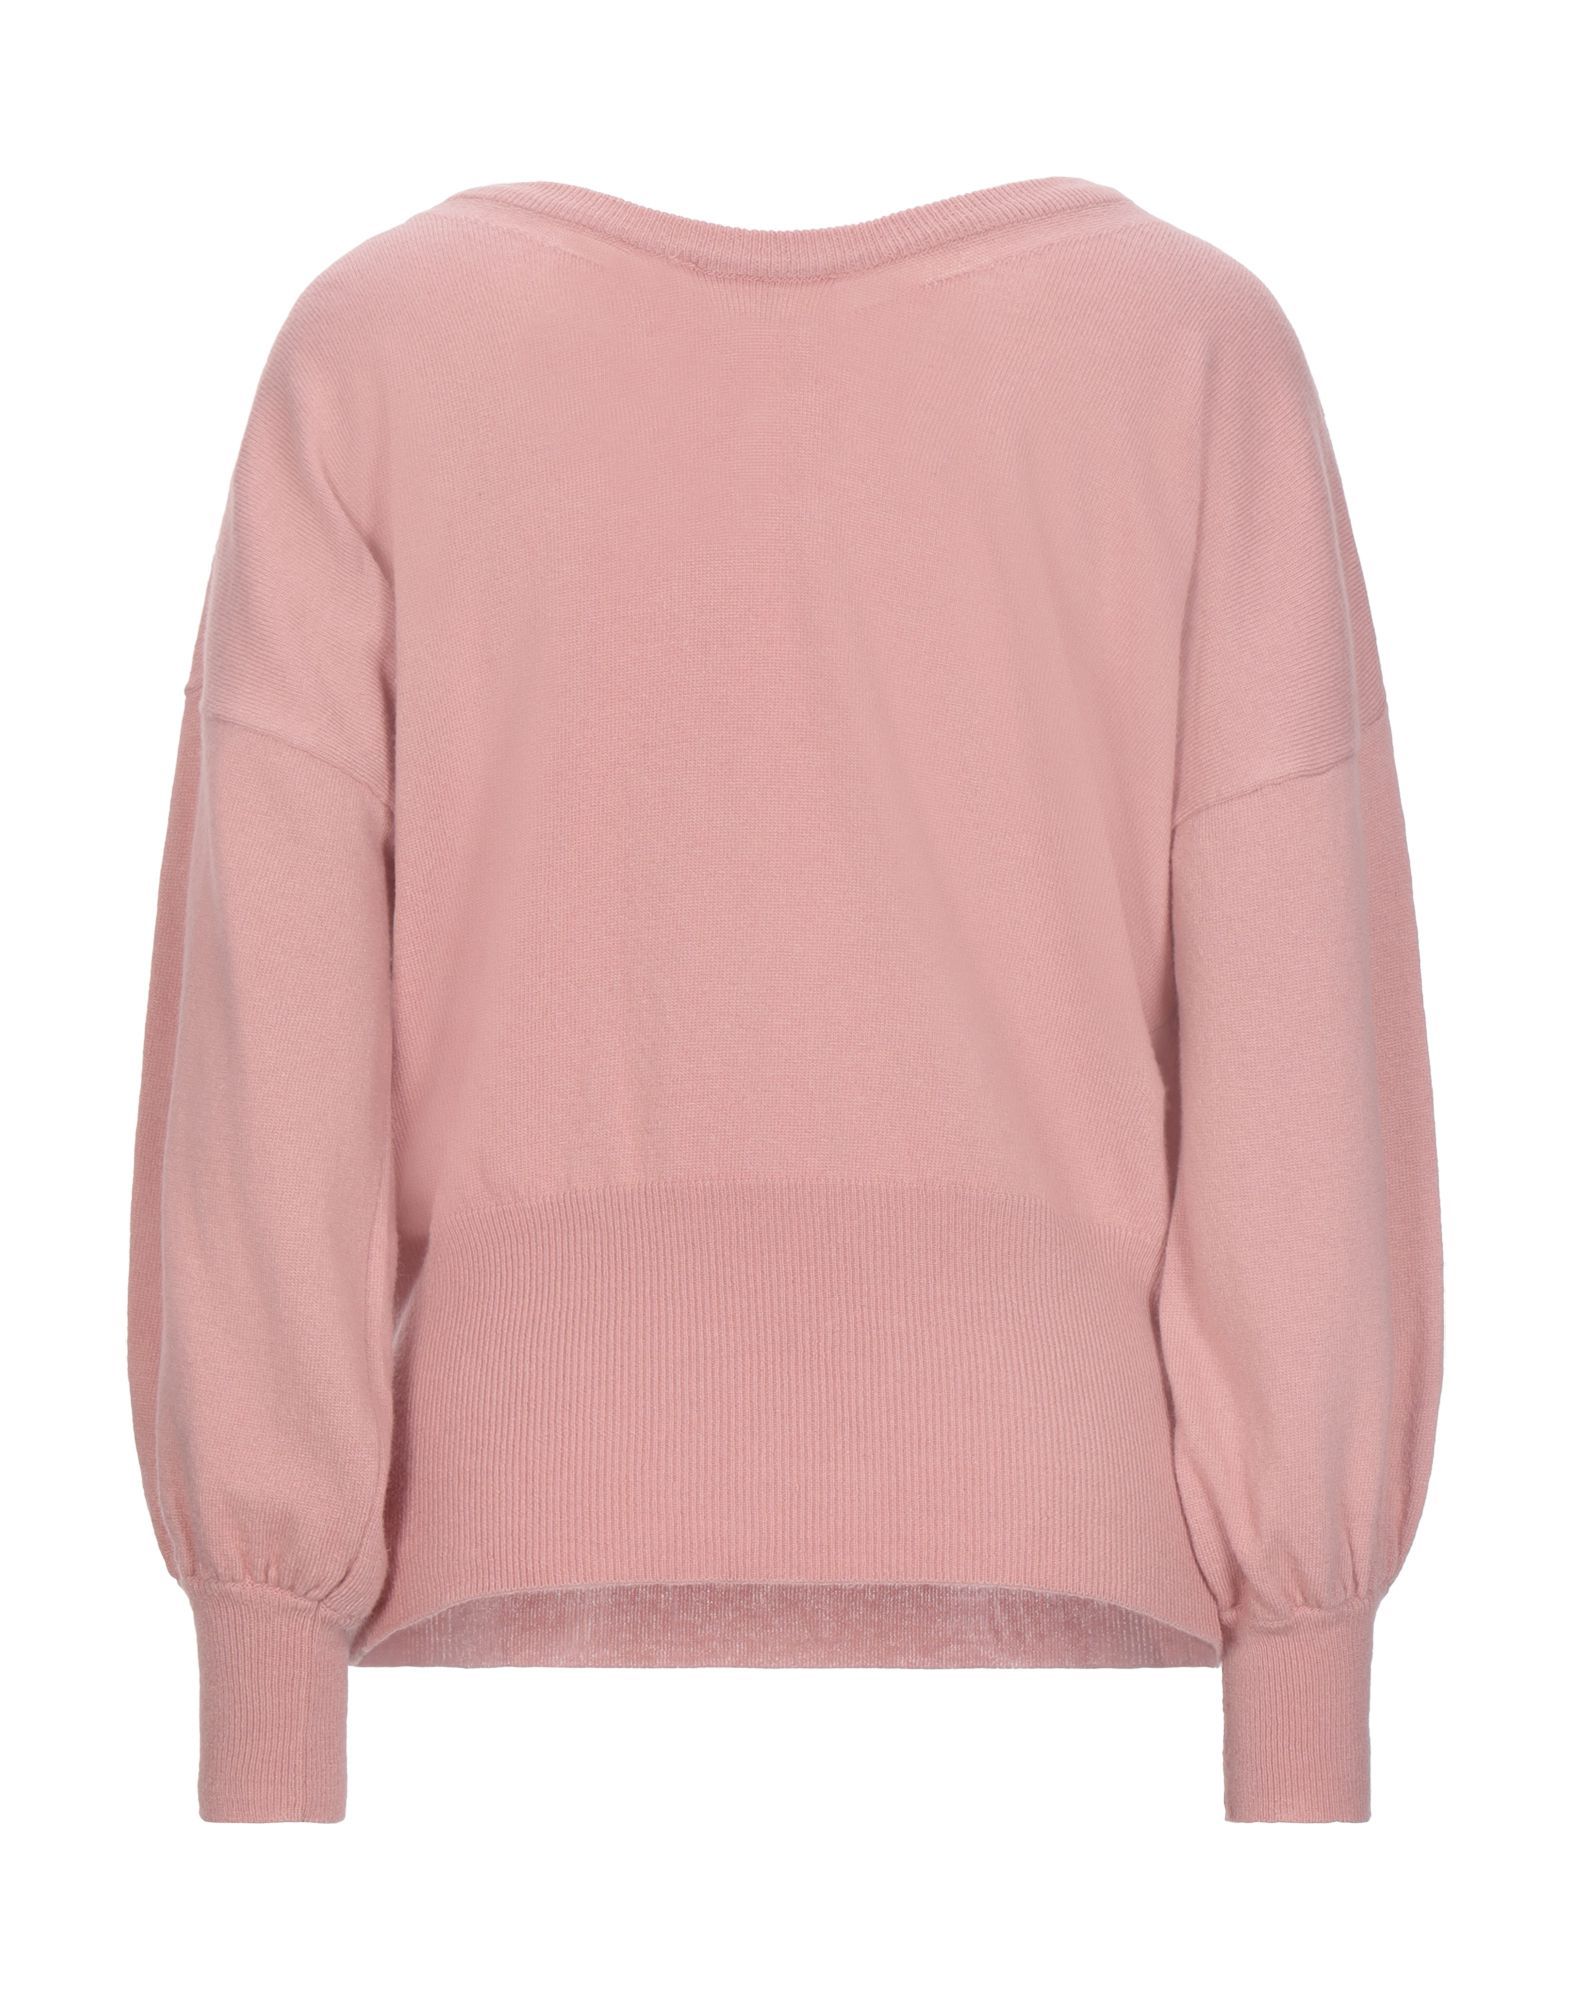 Vicolo Pink Lightweight Knit Jumper